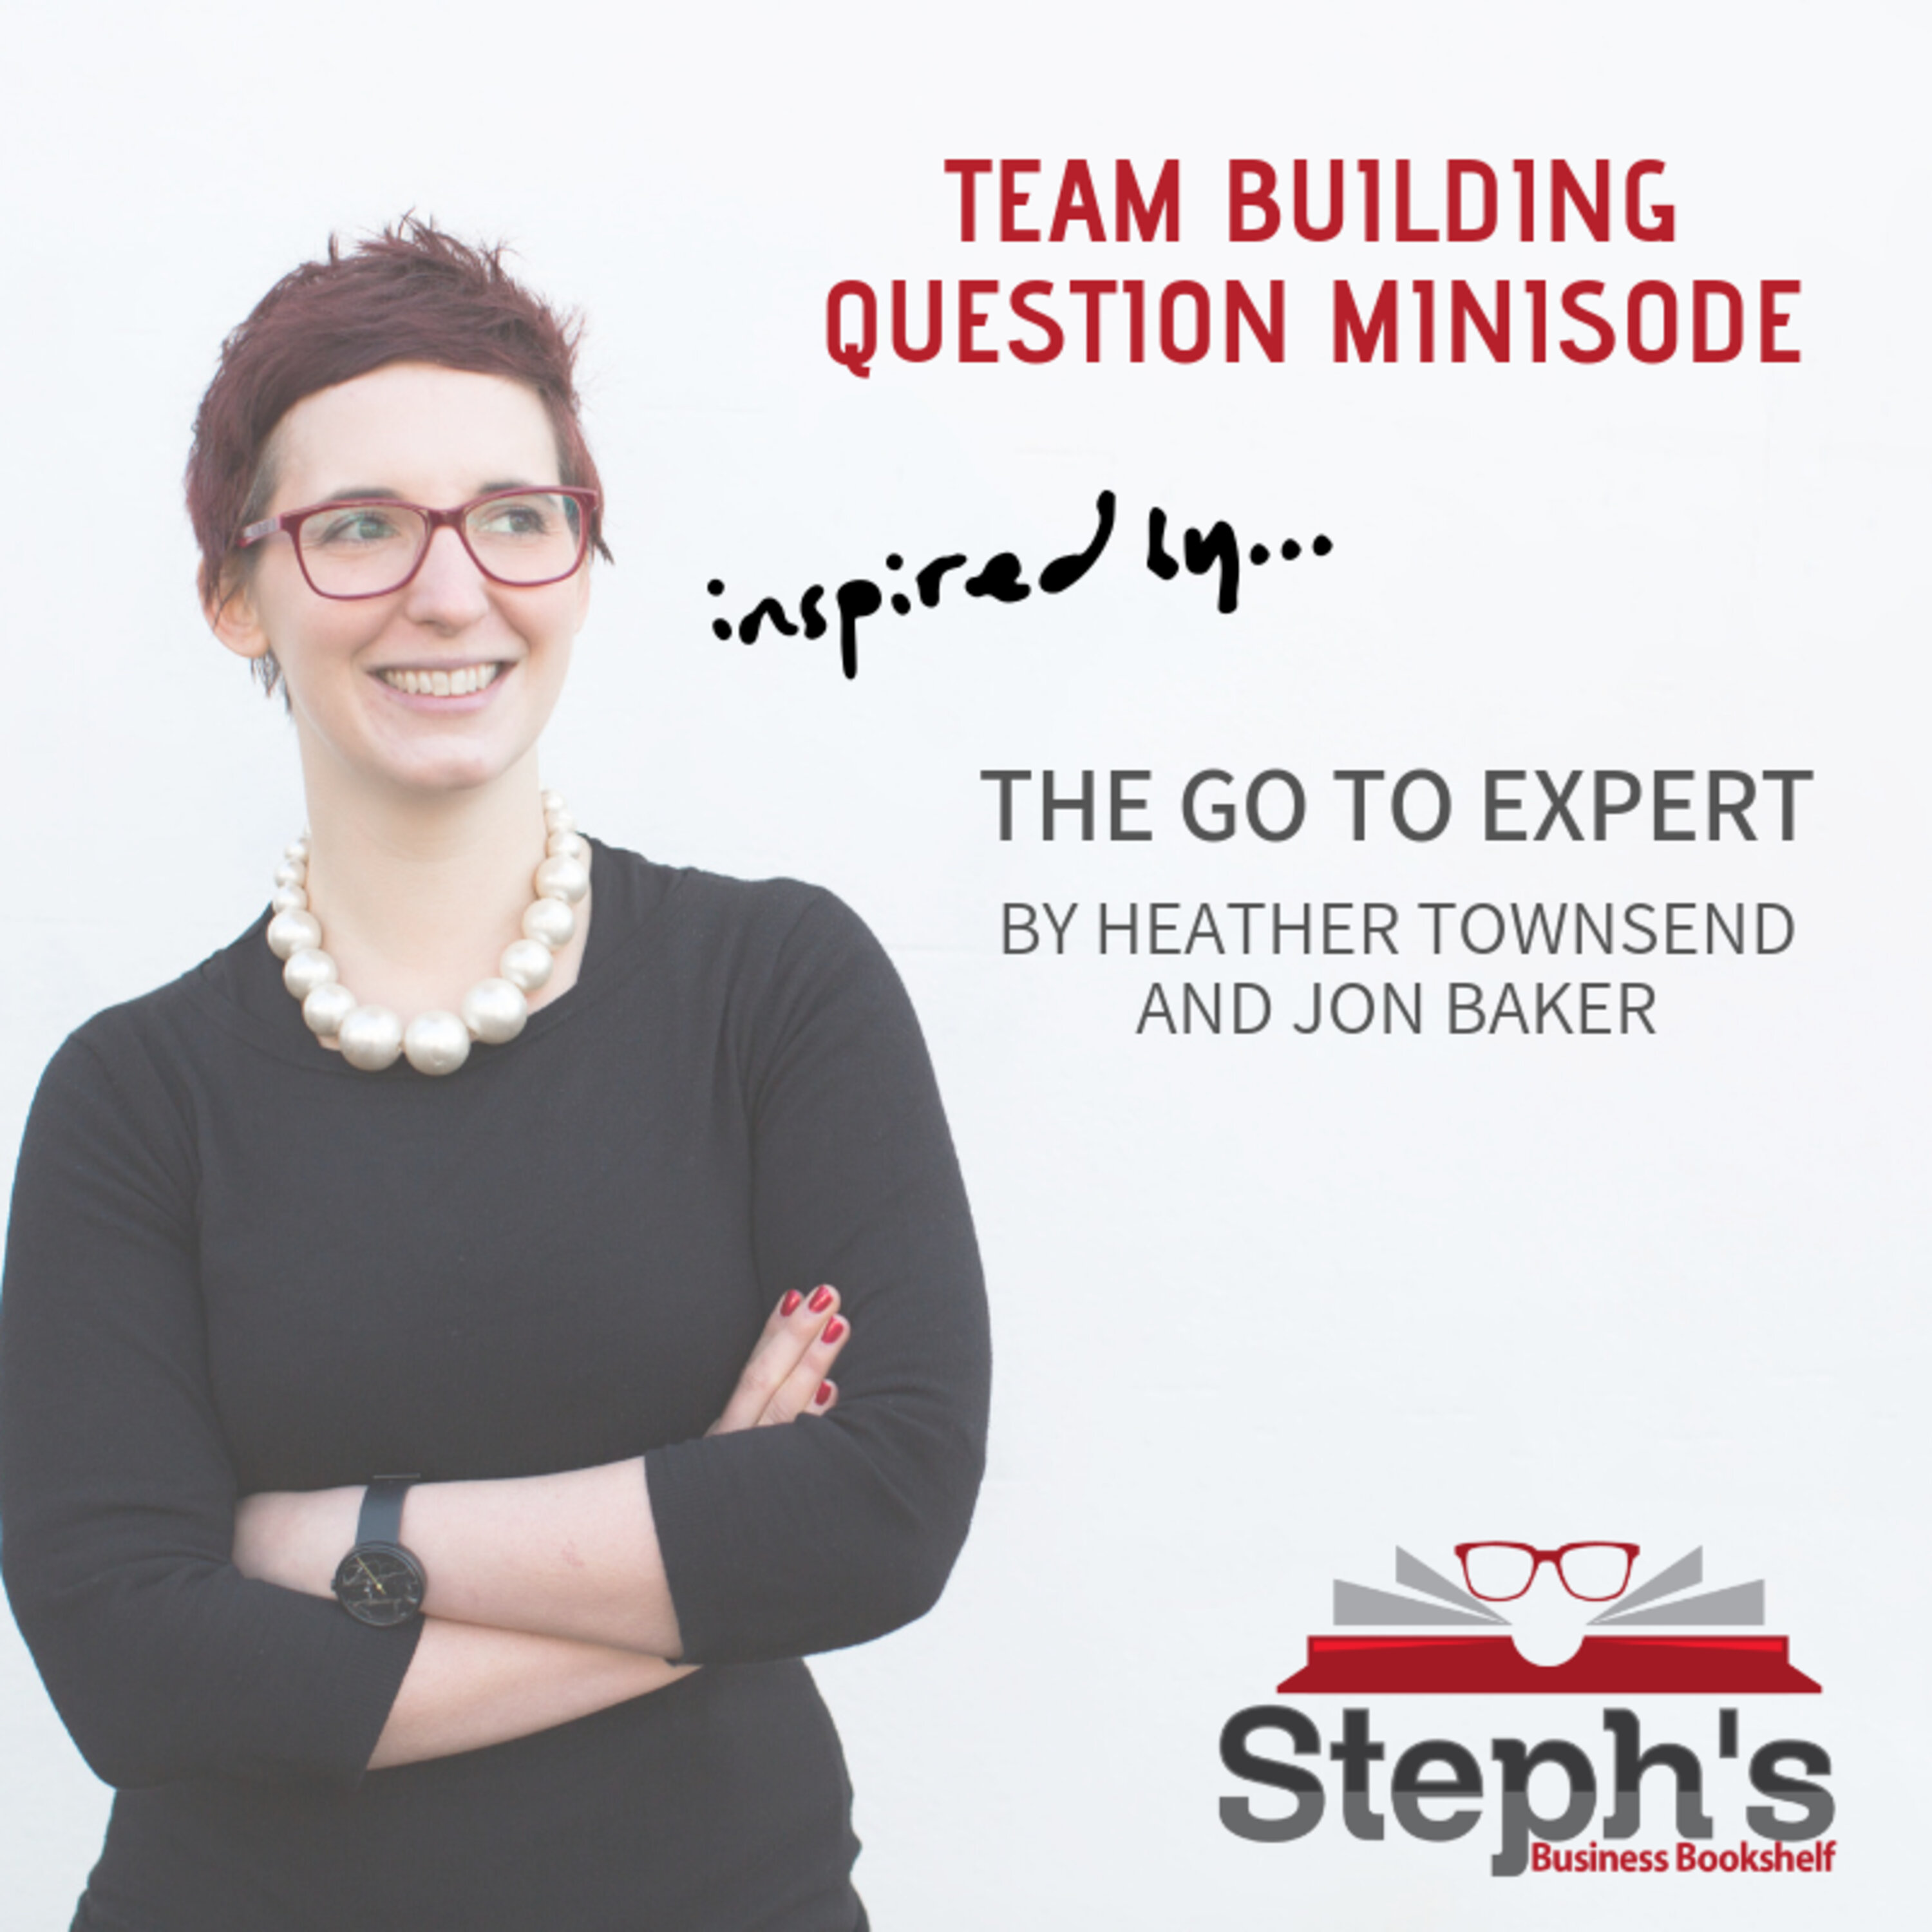 The Go To Expert Team Building Question